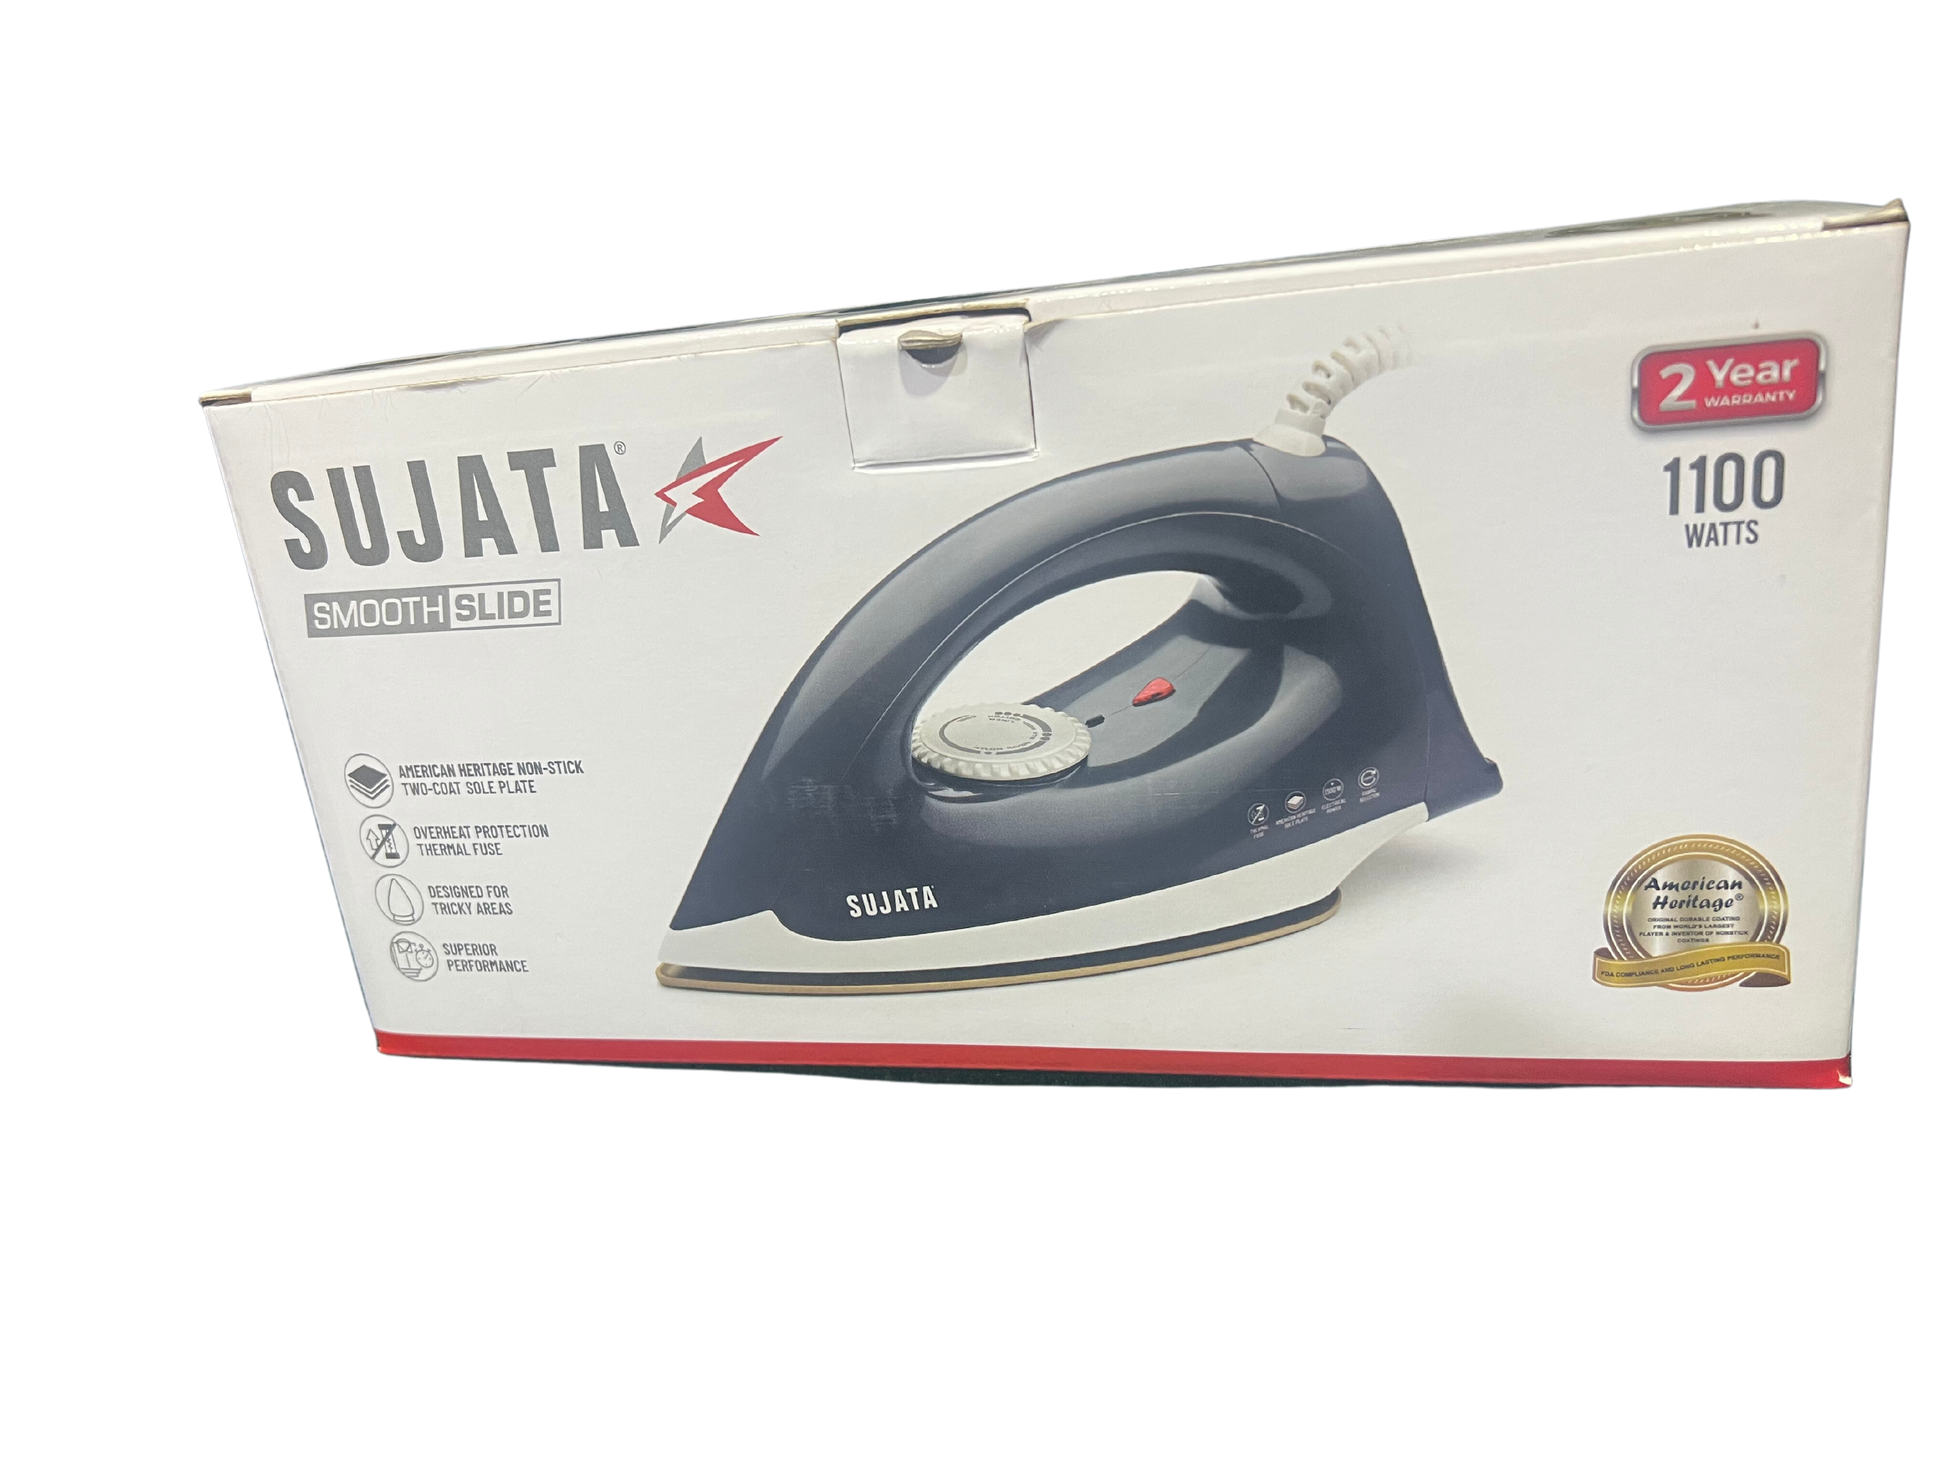 Sujata 1100 Watt Smooth Slide Light Weight Iron | Warranty 2 Years - Premium Dry Irons from Sujata - Just Rs. 661! Shop now at Surana Sons